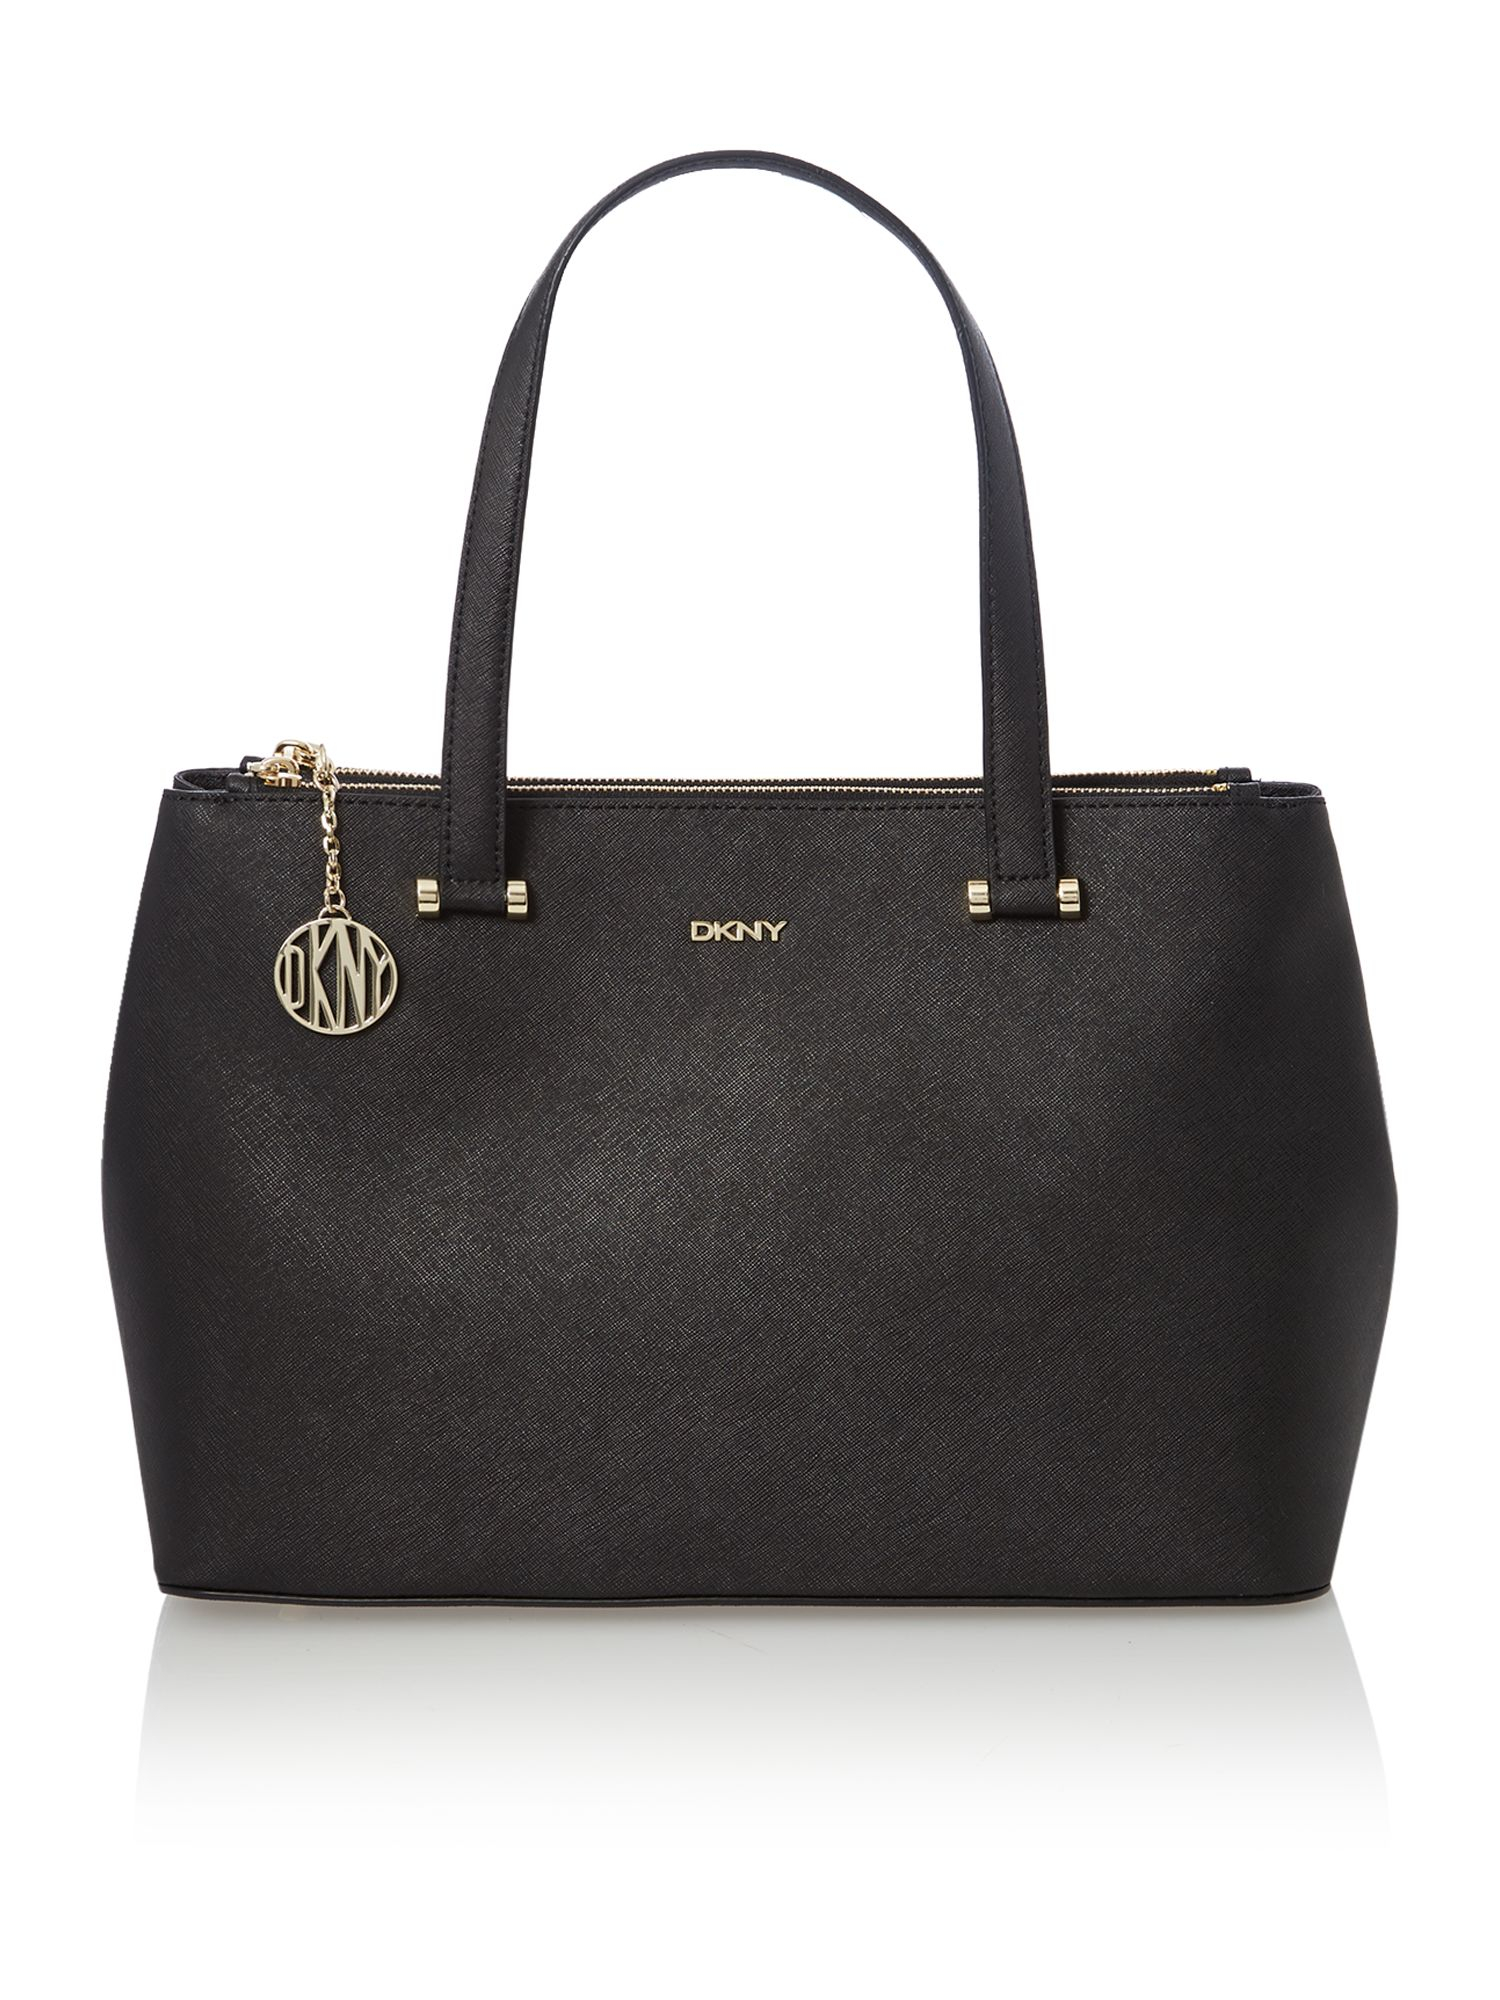 Dkny Saffiano Black Large Double Zip Tote Bag in Black | Lyst